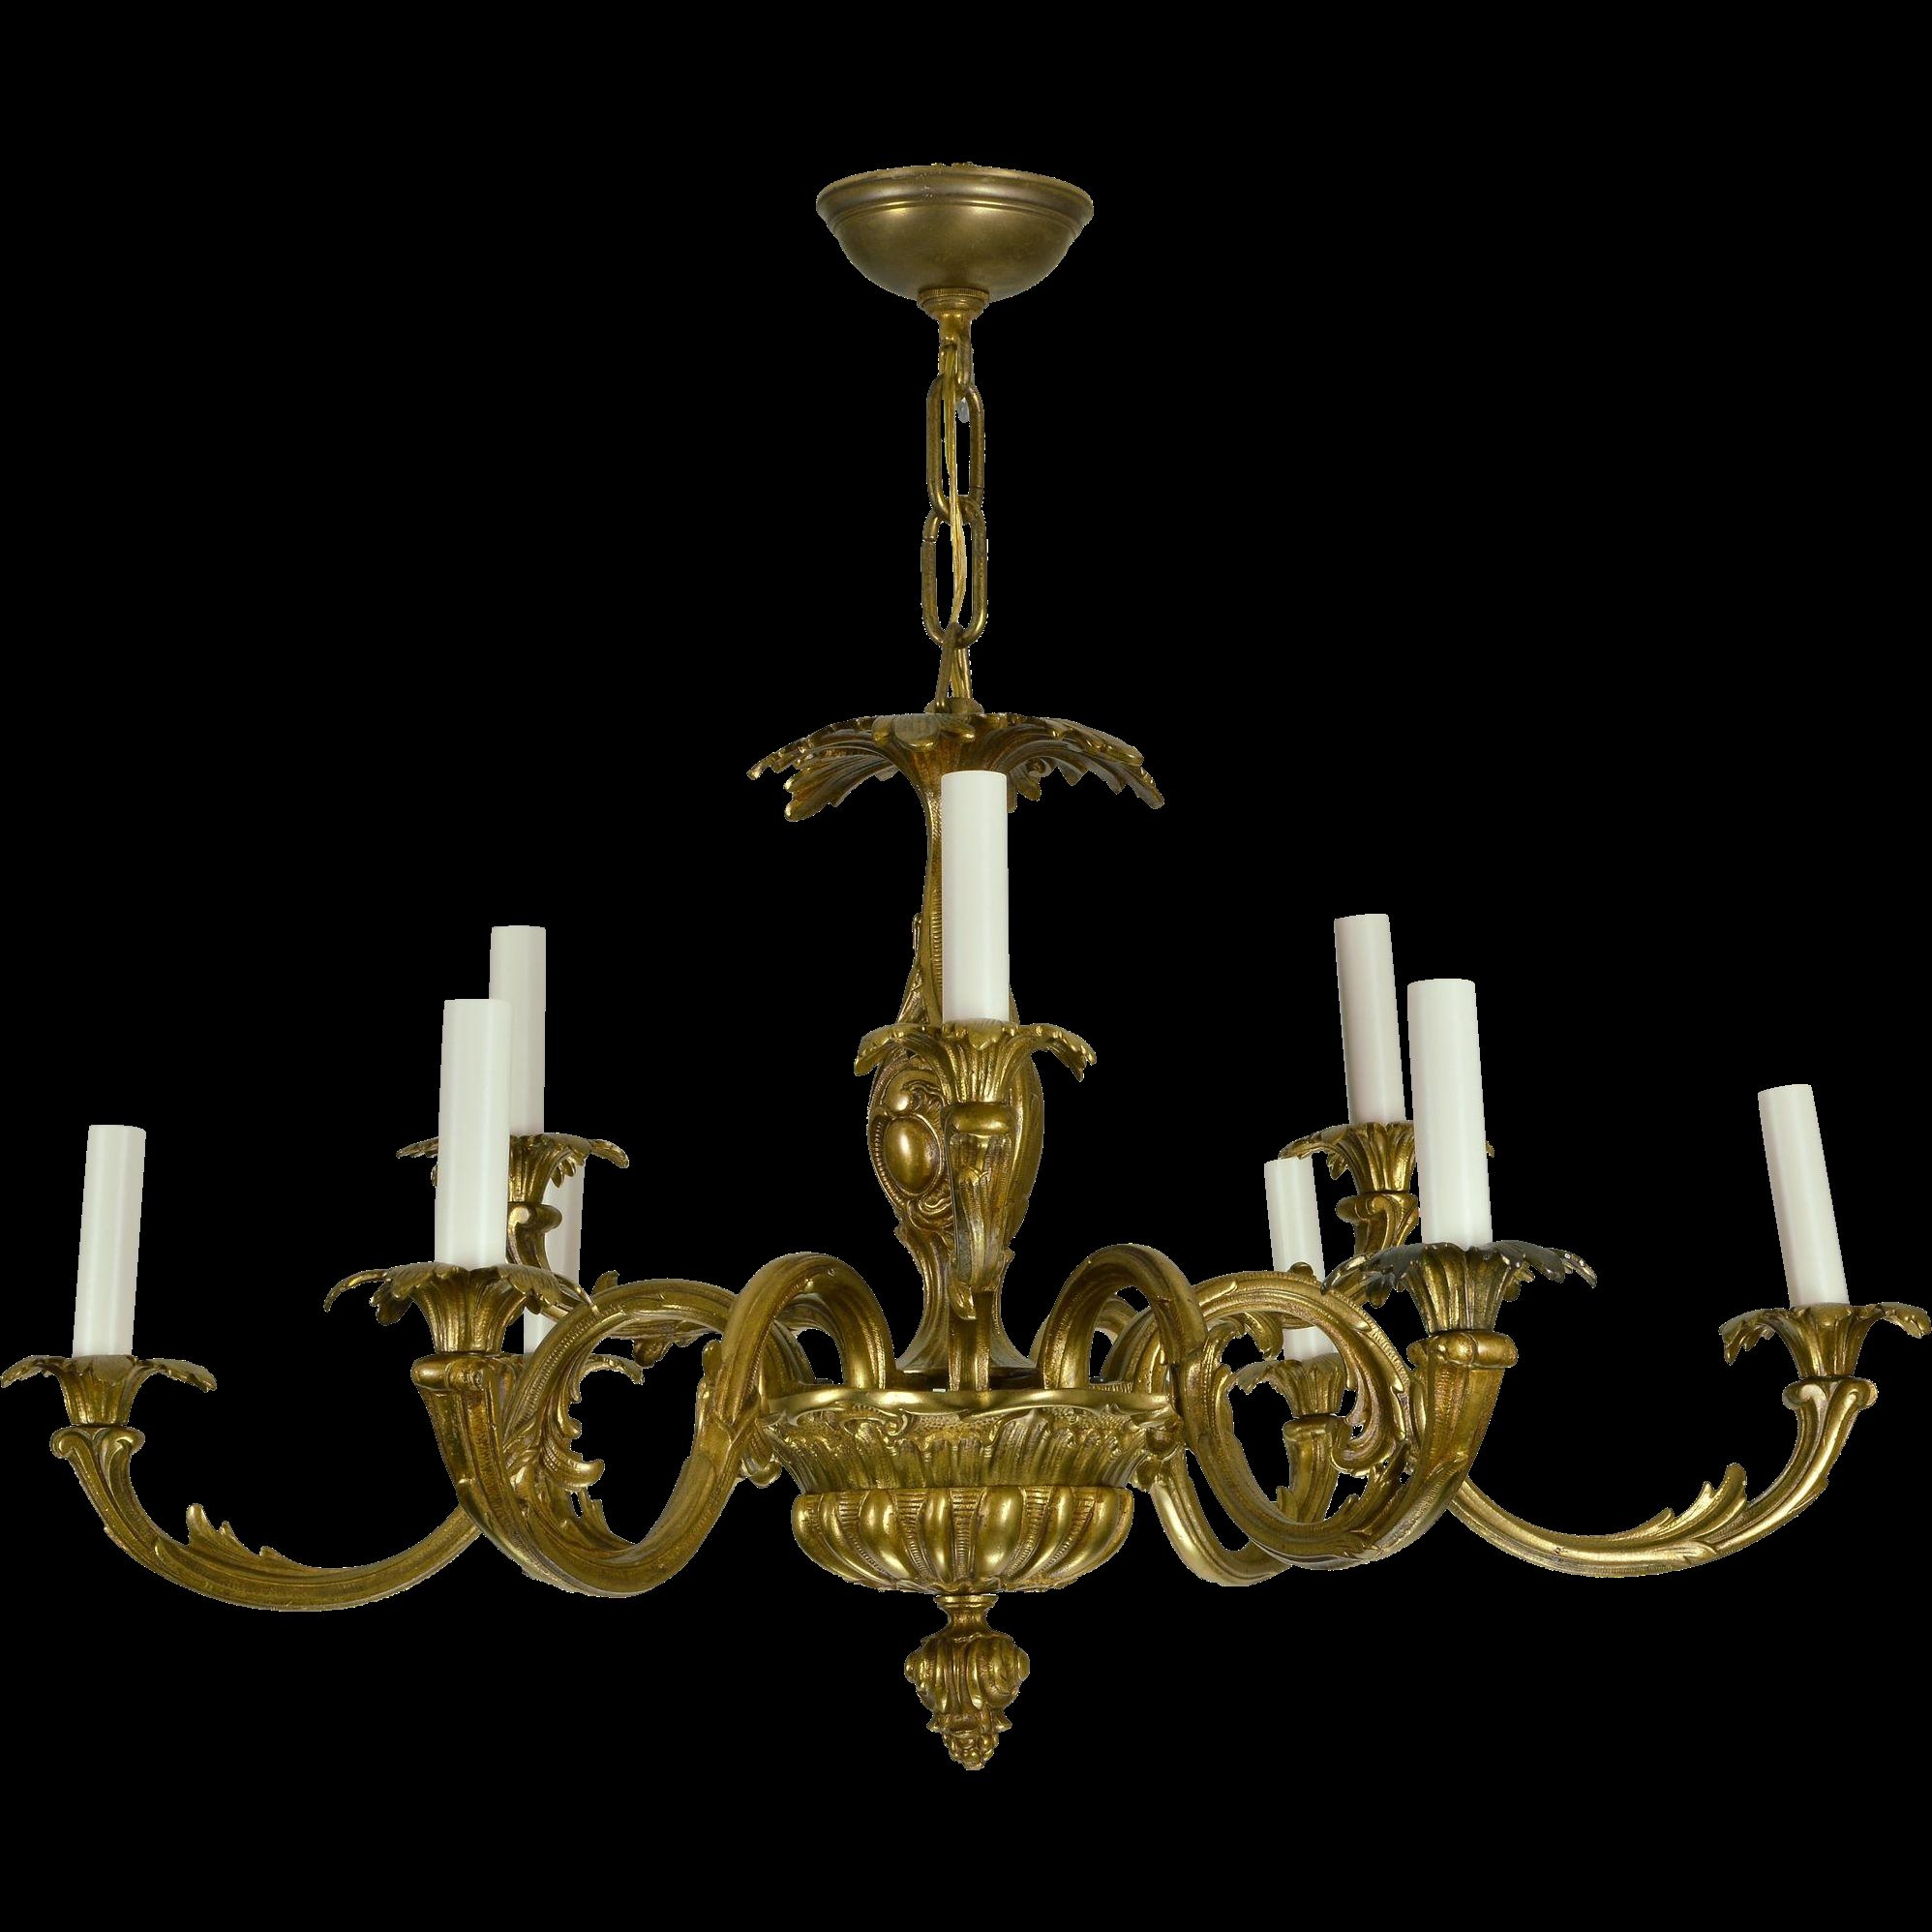 Vintage Brass French Baroque Chandelier From Tolw On Ru Lane Intended For Vintage Chandelier (View 7 of 12)